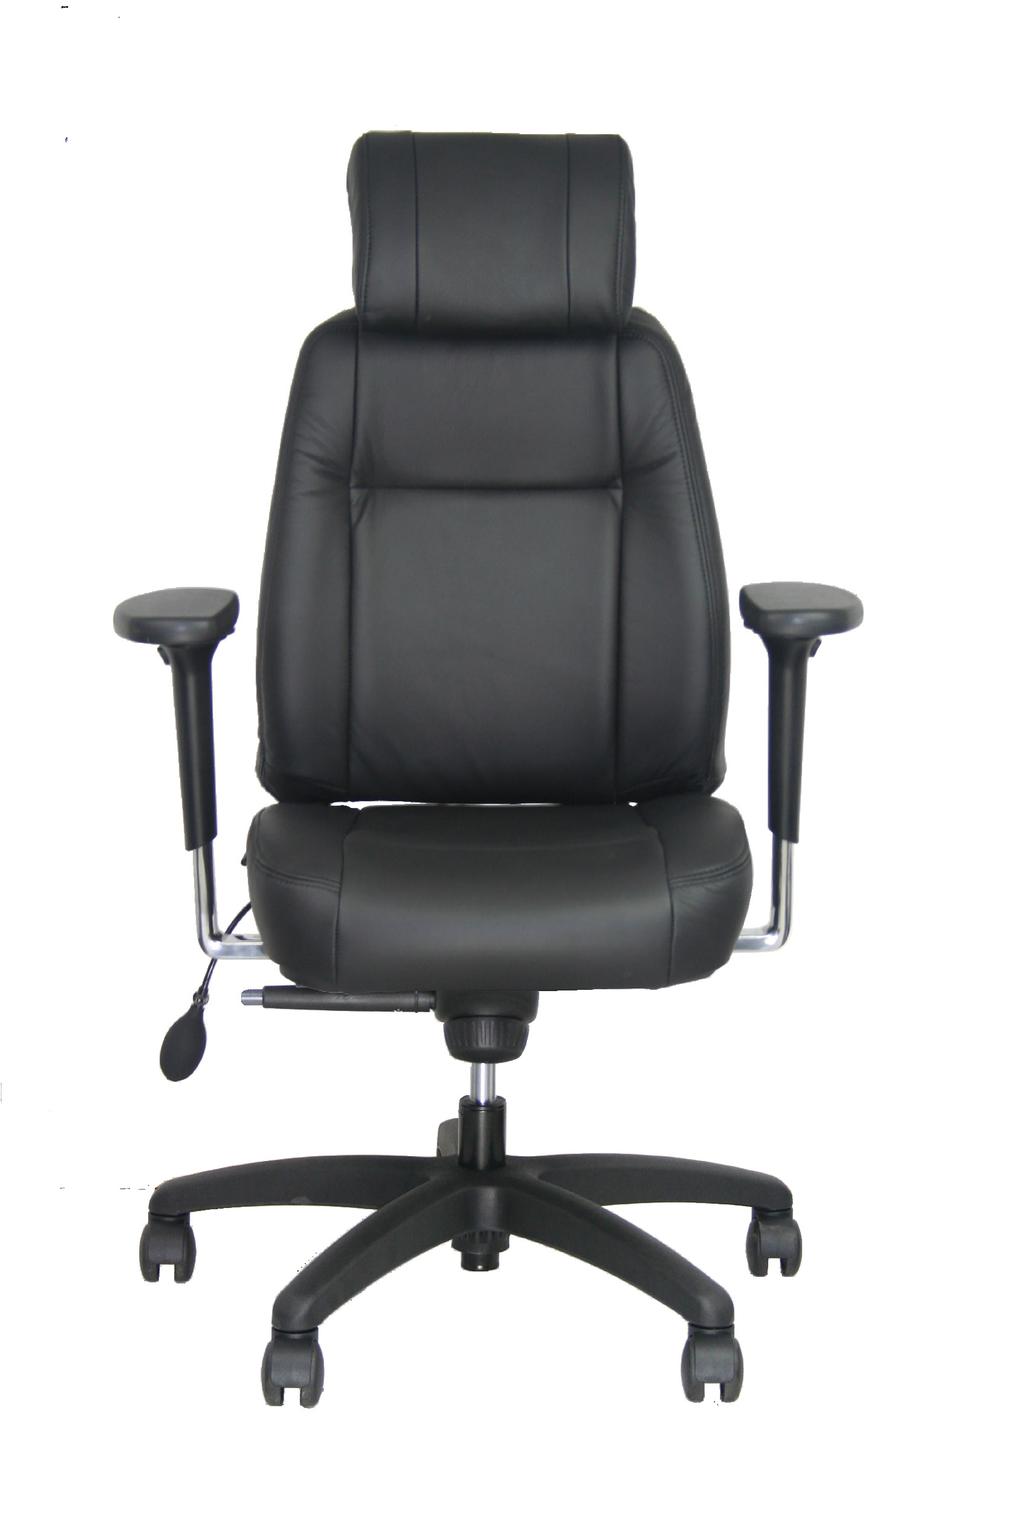 2000 Series The IRON HORSE Seating 2000 Series features the latest ergonomic designs and commercial grade components.